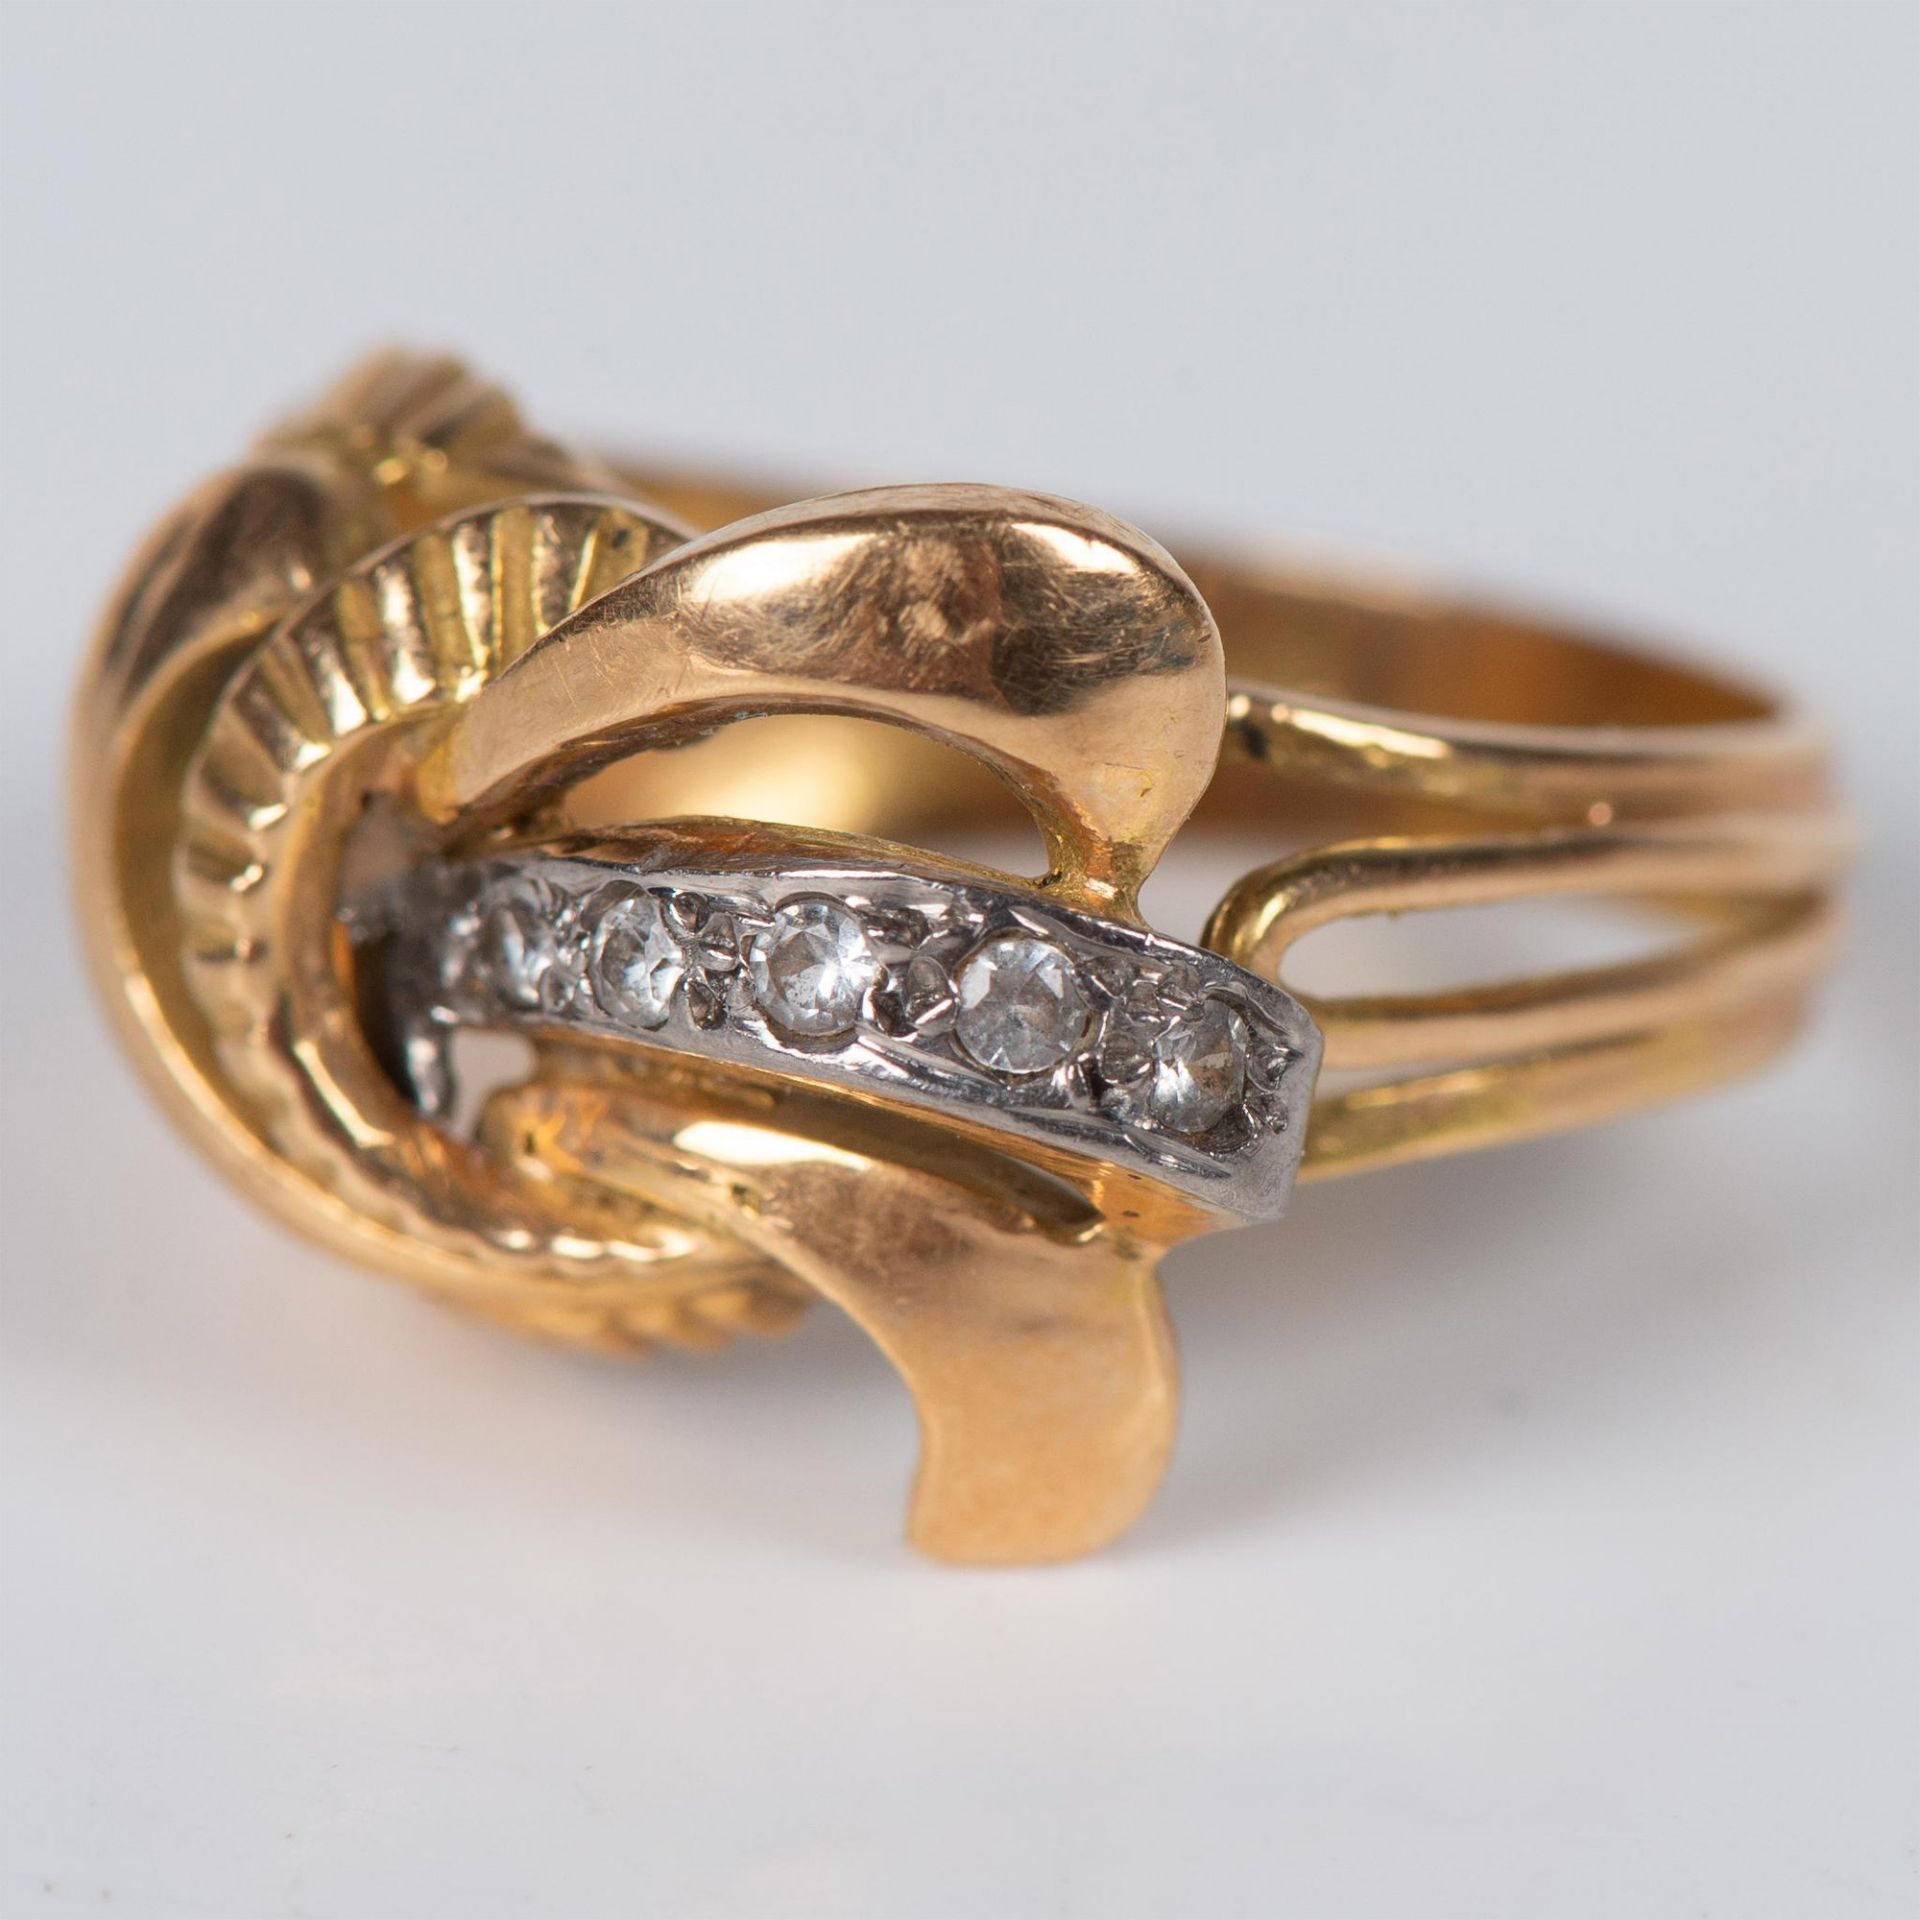 18K Gold and Diamonds Cocktail Ring - Image 3 of 5